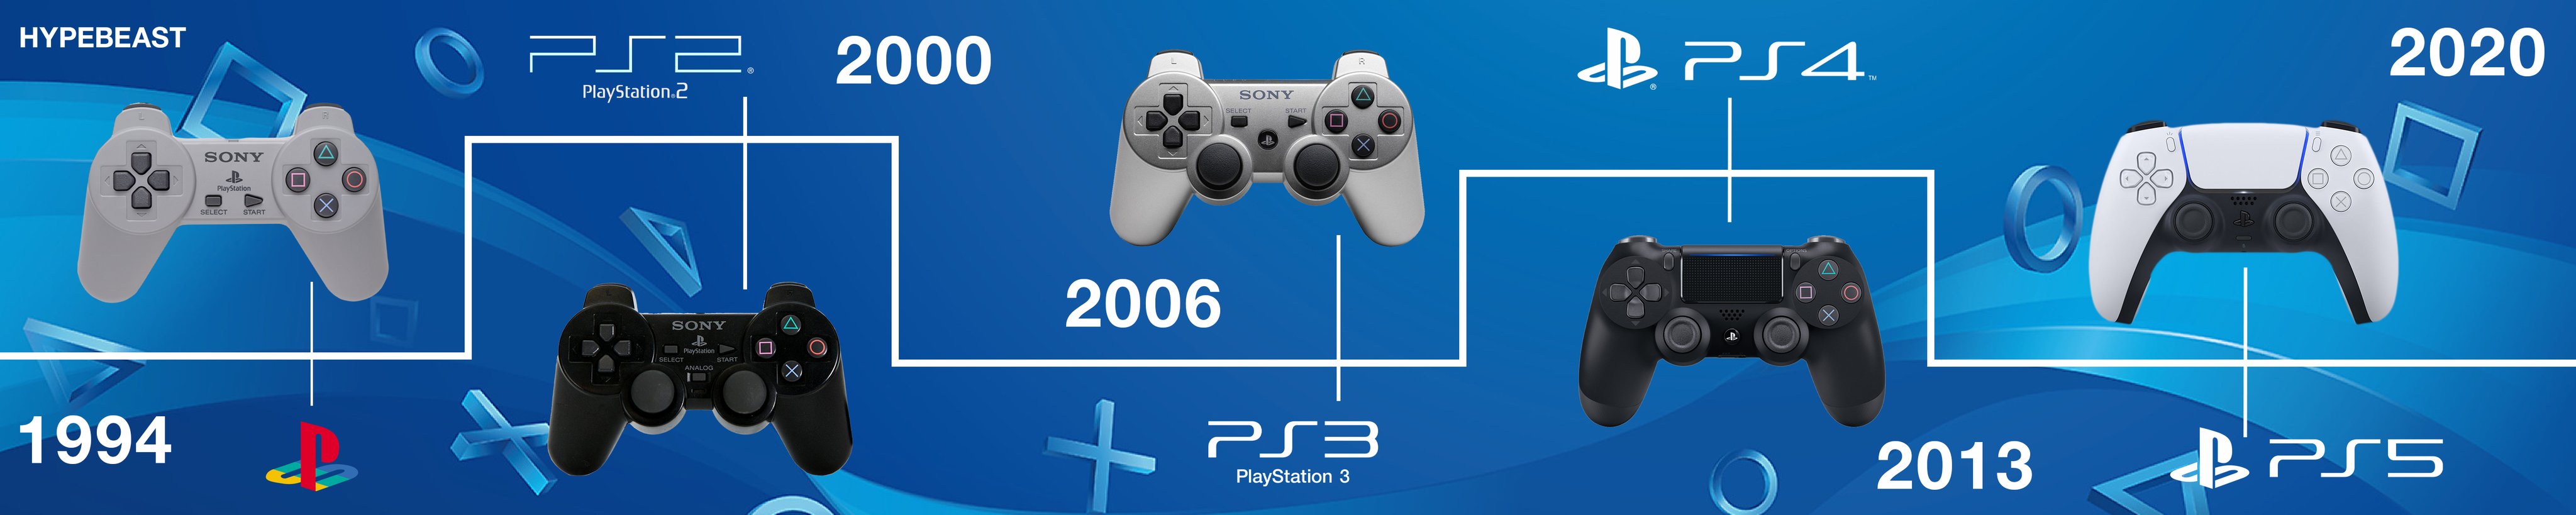 Twitter 上的HYPEBEAST："Evolution of the #Playstation which one was your favorite?⁠ Photo: HYPEBEAST https://t.co/Fk3xVdrSDF" / Twitter